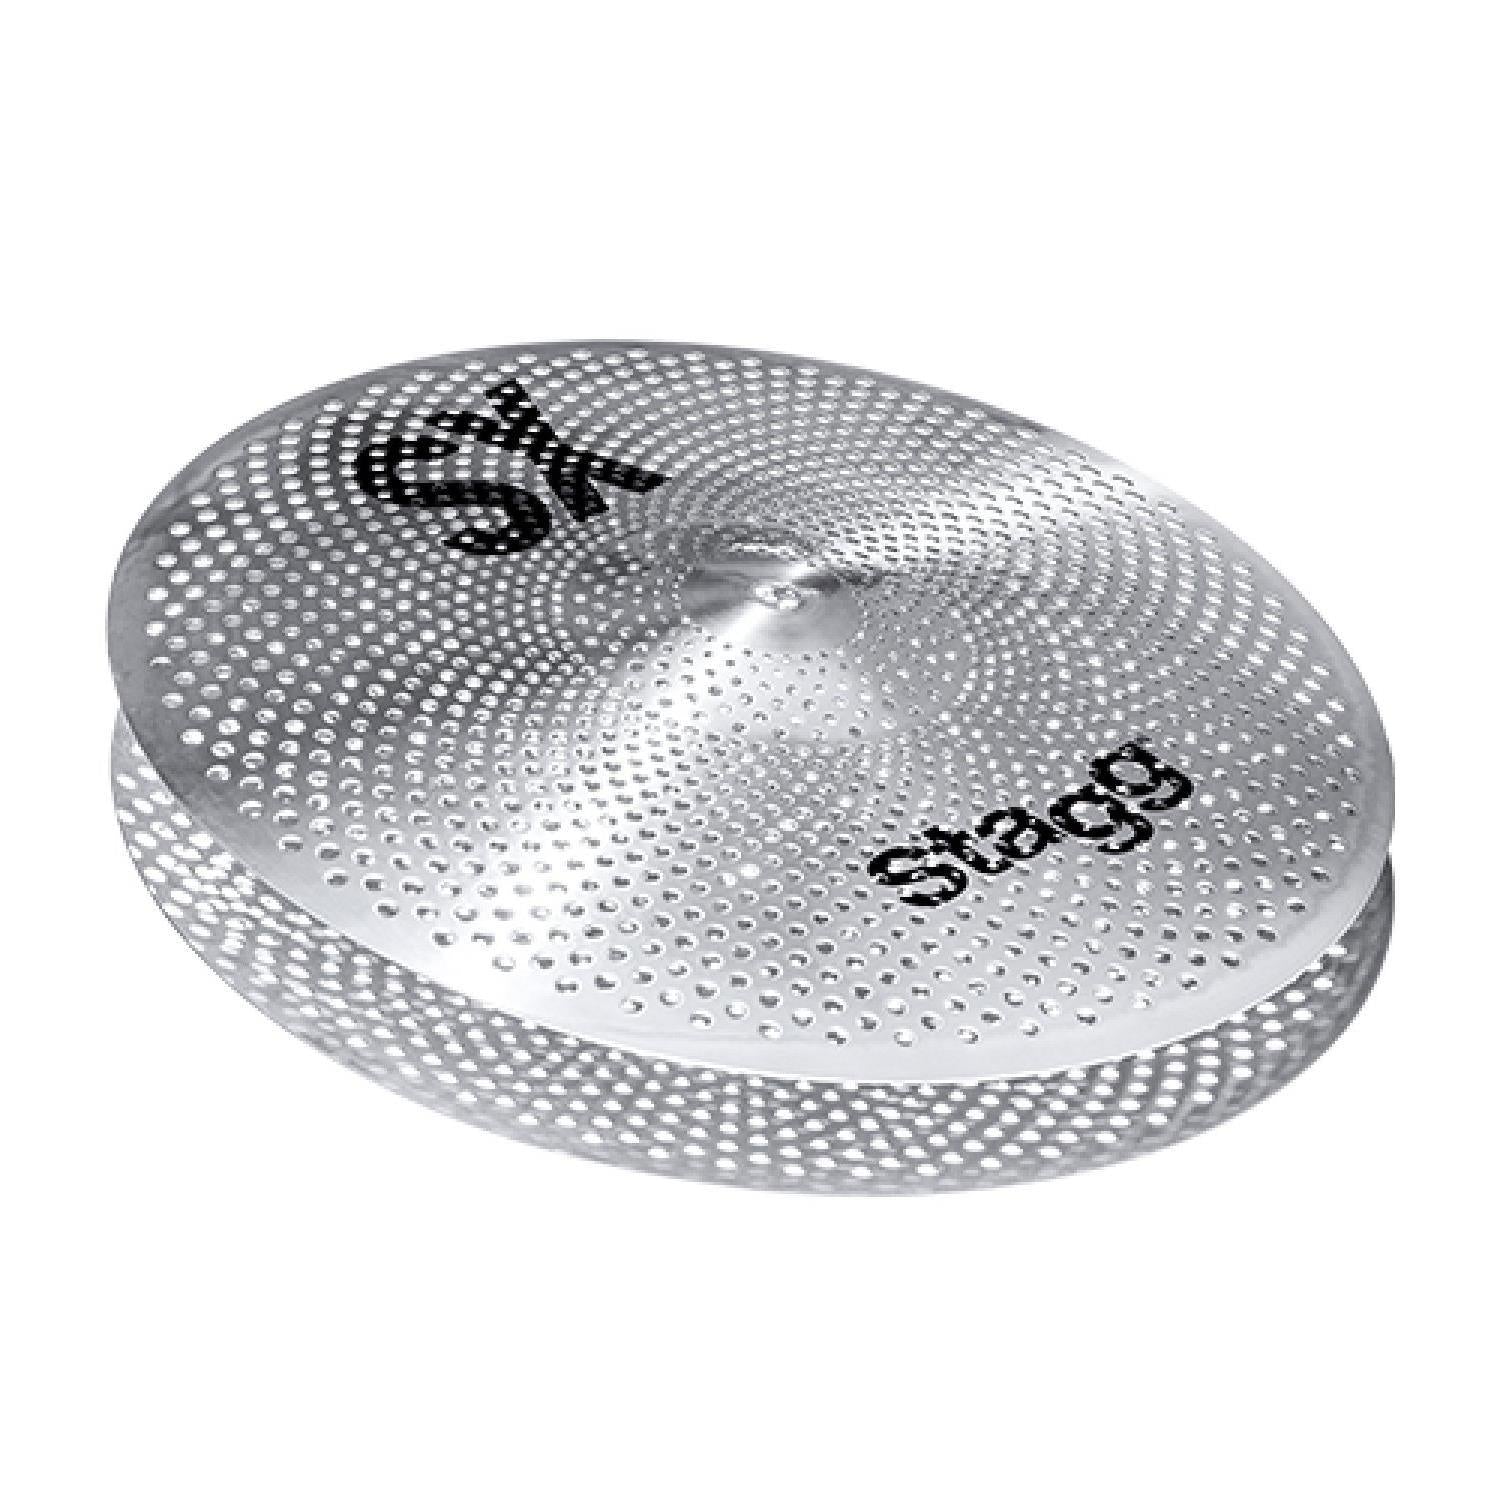 Stagg SXM Low Volume Cymbal Set 14/16/18/20" - DY Pro Audio